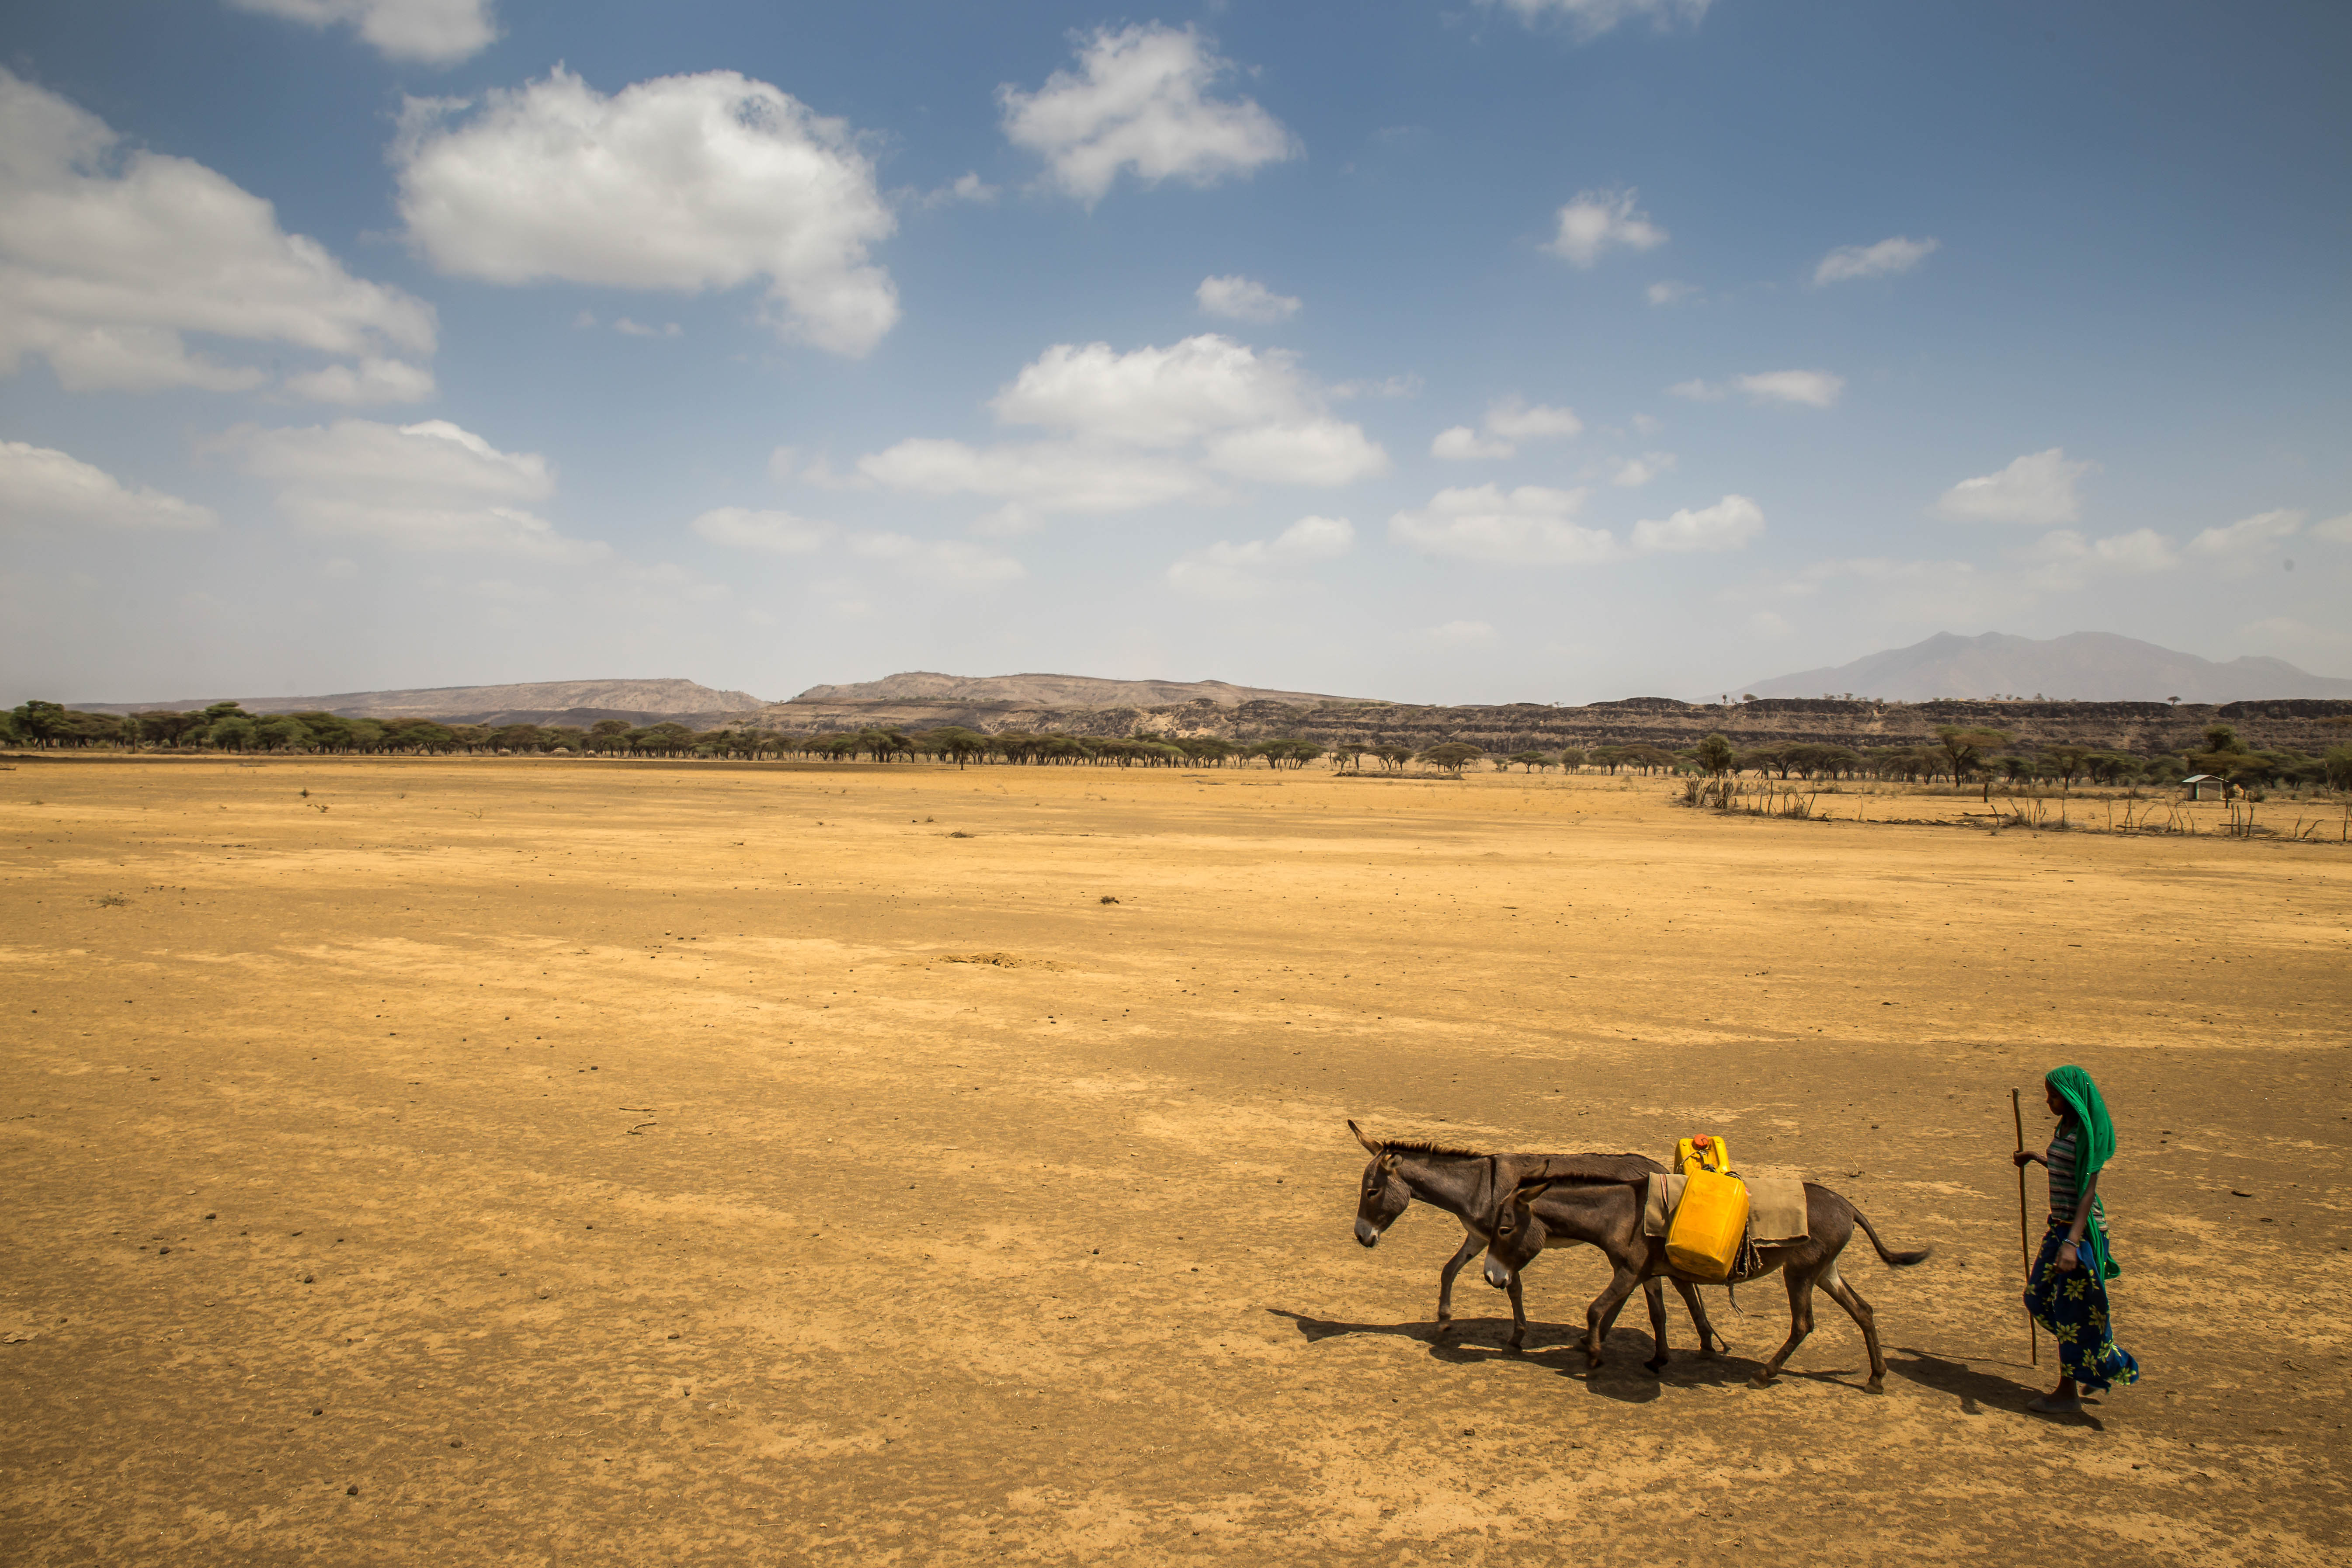 Woman walking with donkeys carrying water during drought in Ethiopia. Credit: Ayene, UNICEF Ethiopia